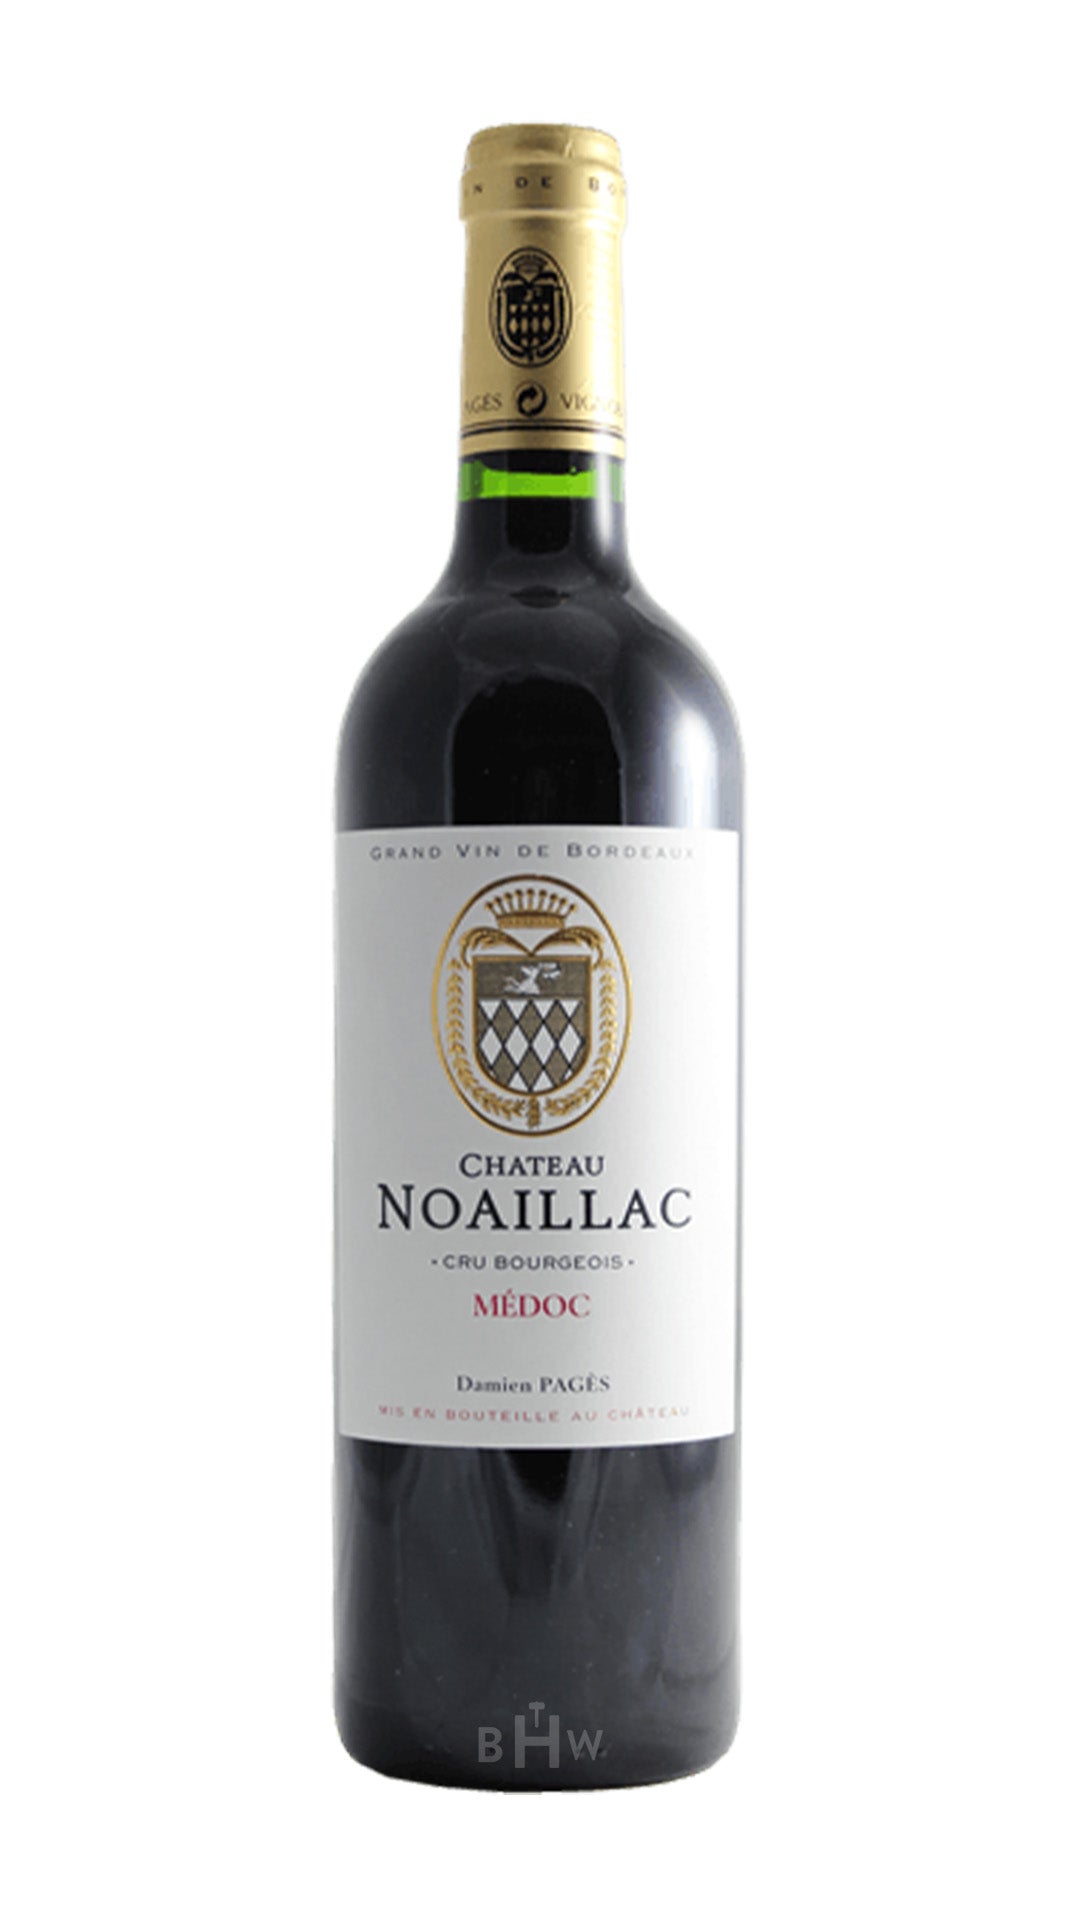 Bourgeois 2018 Chateau Medoc Cru Noaillac Superieur